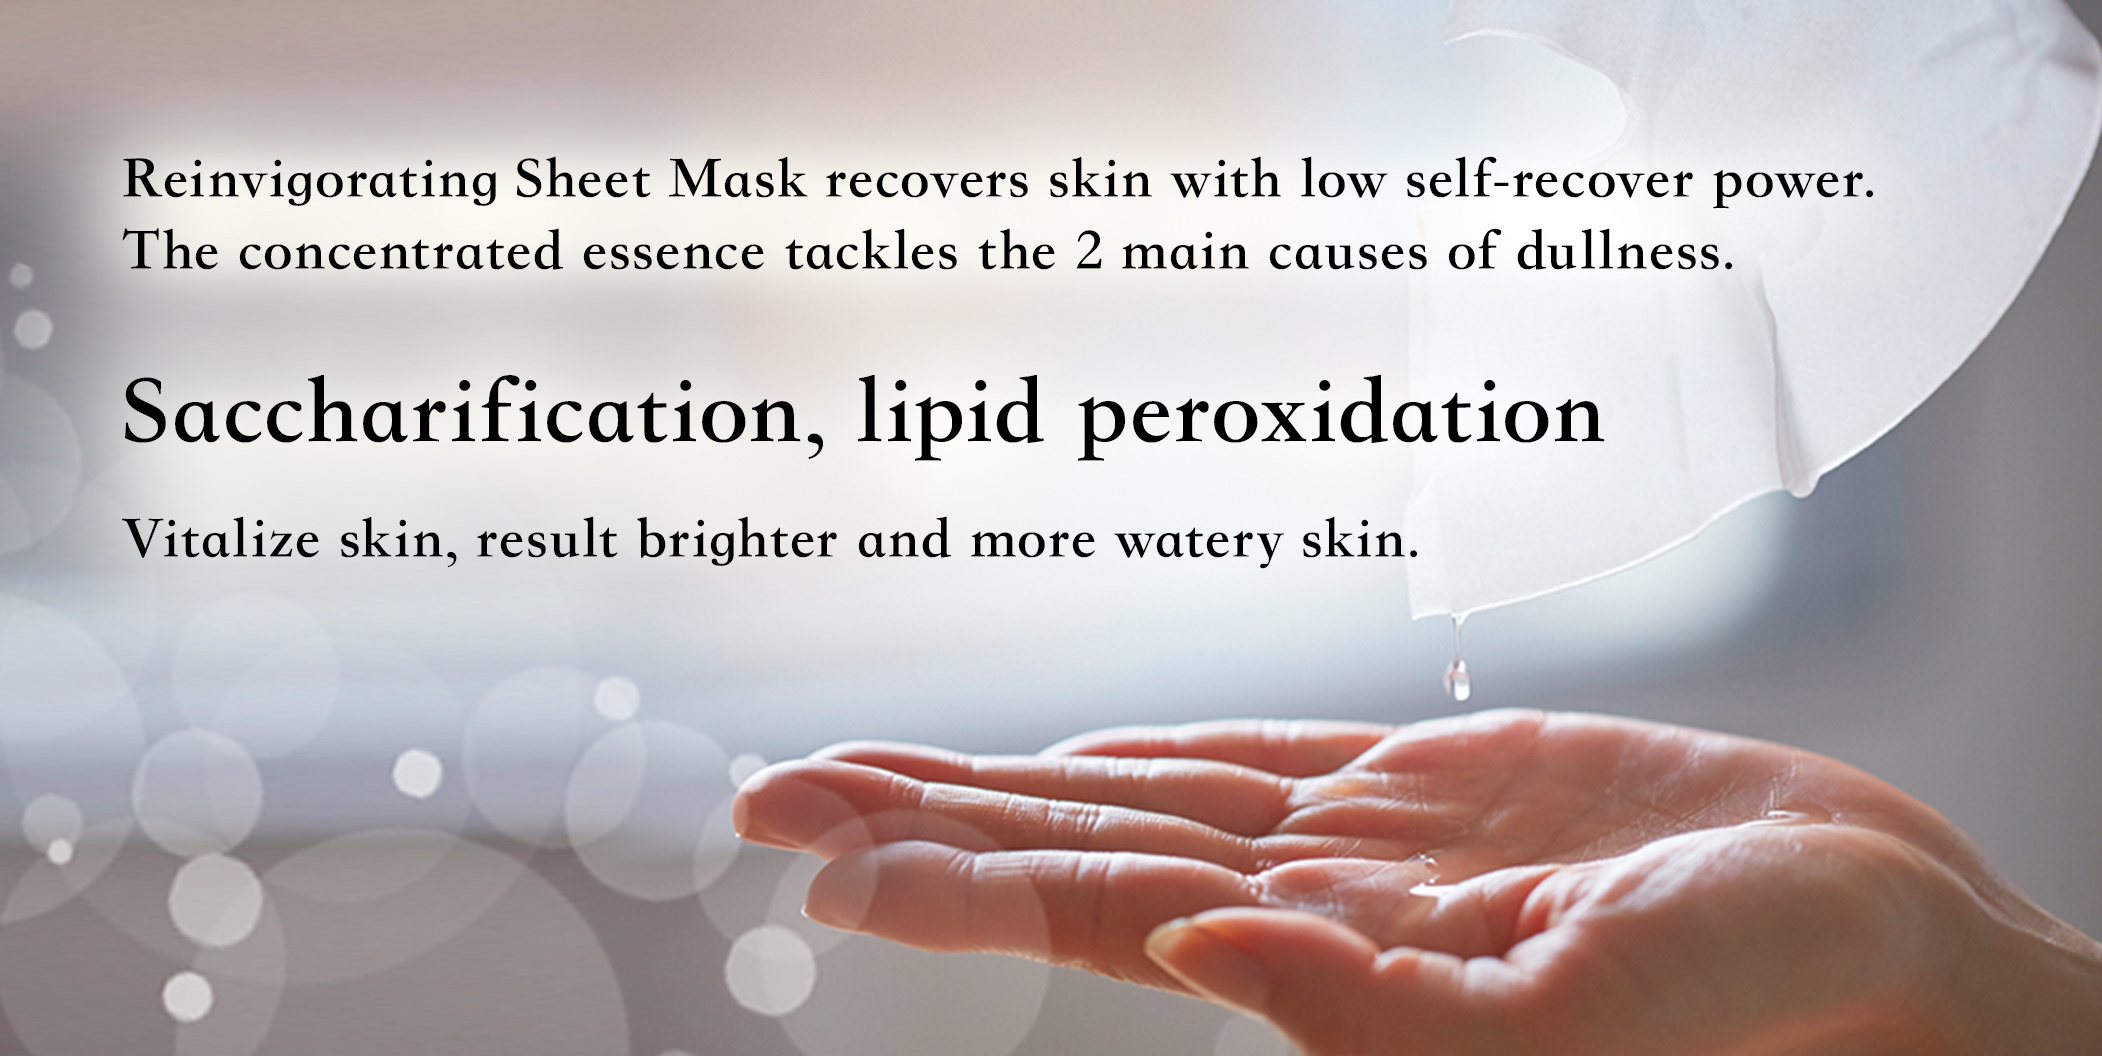 Reinvigorating Sheet Mask recovers skin with low self-recover power. The concentrated essence tackles the 2 main causes of dullness. Saccharification, lipid peroxidation Vitalize skin, result brighter and more watery skin.